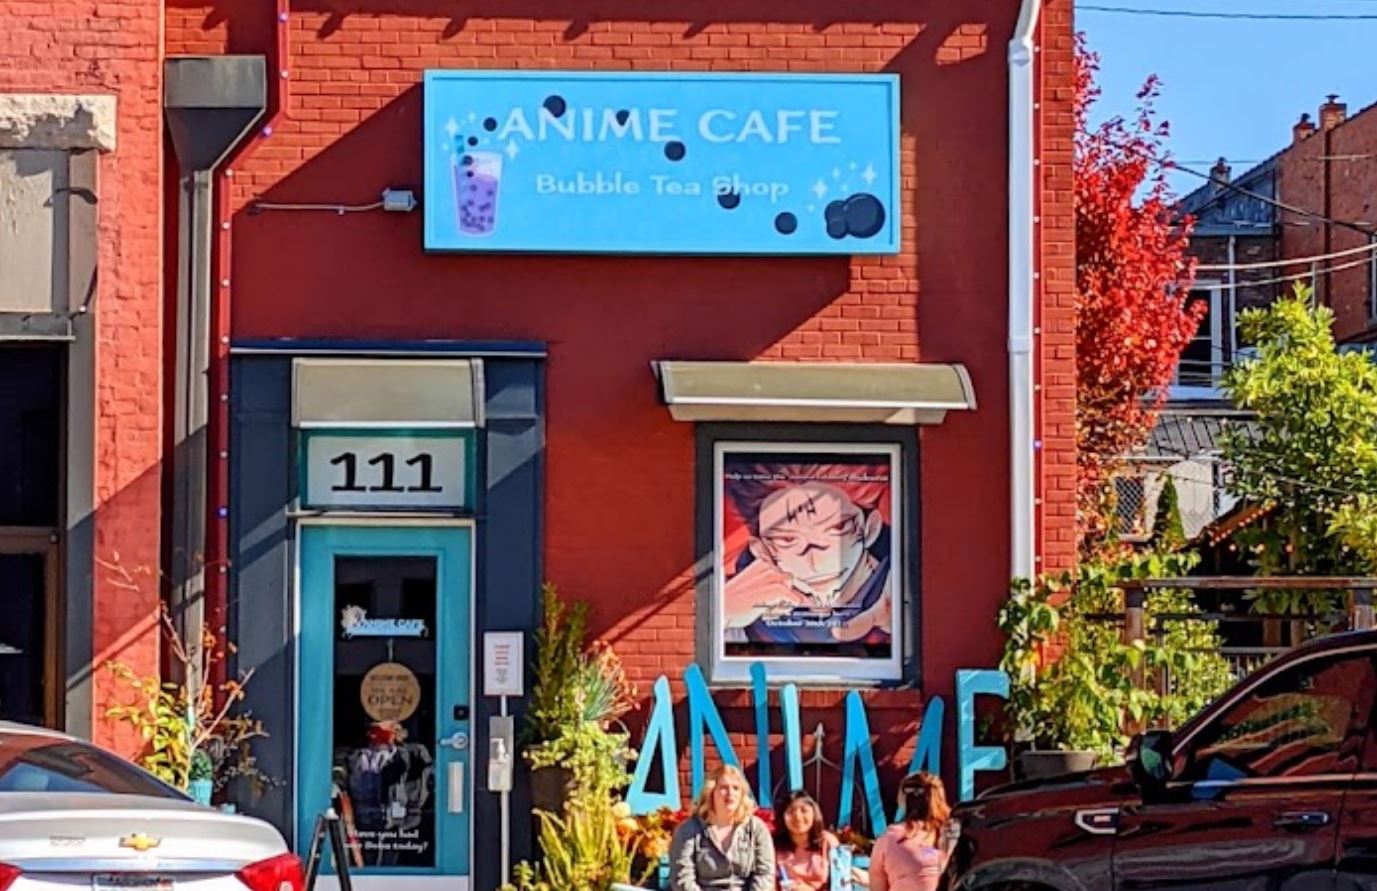 Rogers 15YearOld Turns Love of Anime and Bubble Tea into Downtown Business